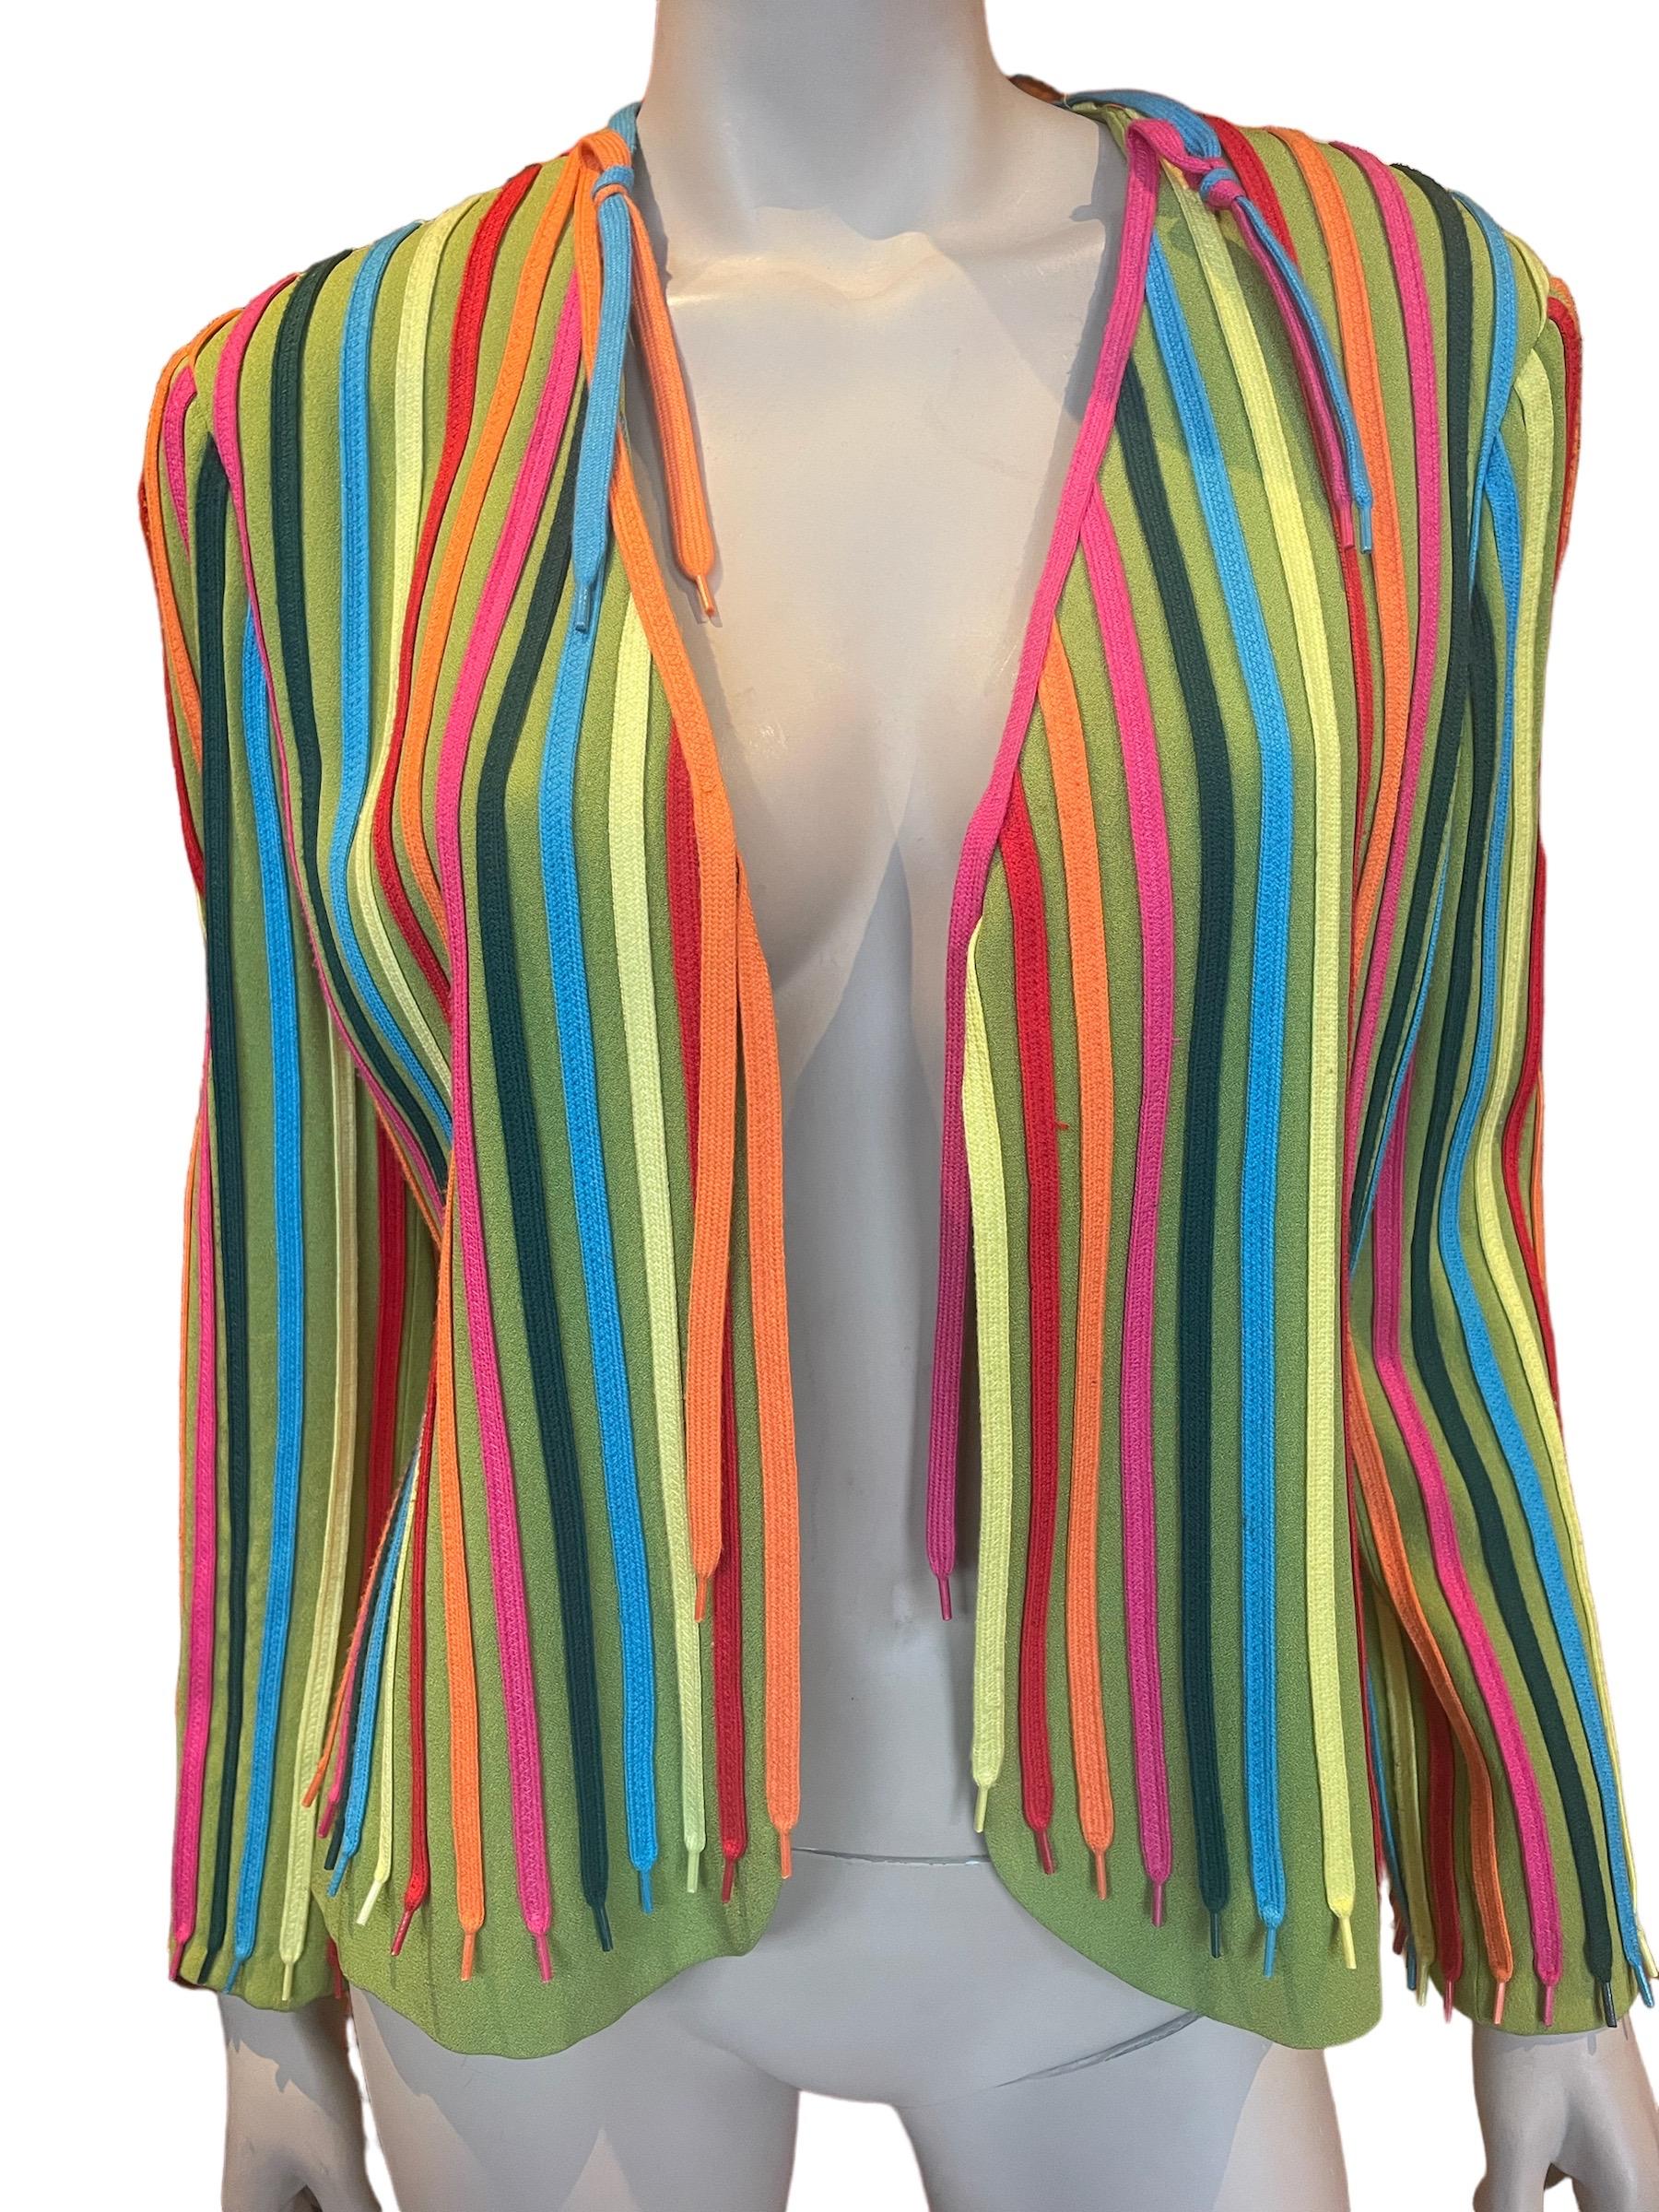 90s Moschino Cheap and Chic Rainbow Shoelace Blazer 

Amazing and rare Moschino piece from the 1990s. Rainbow shoe lace sewed into green blazer.